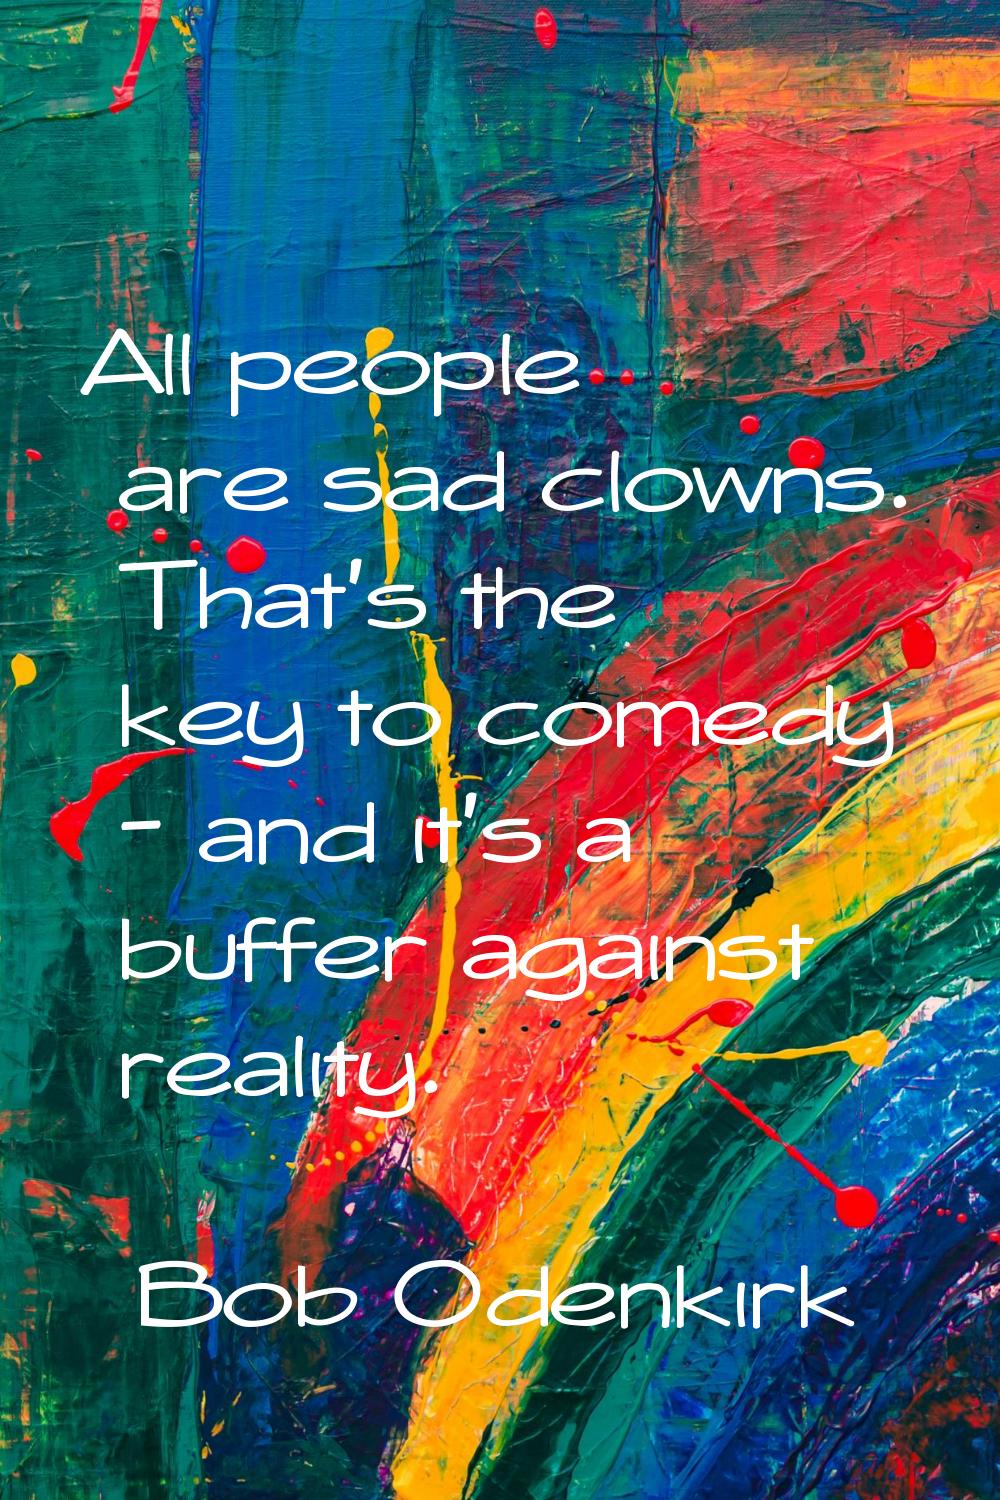 All people are sad clowns. That's the key to comedy - and it's a buffer against reality.